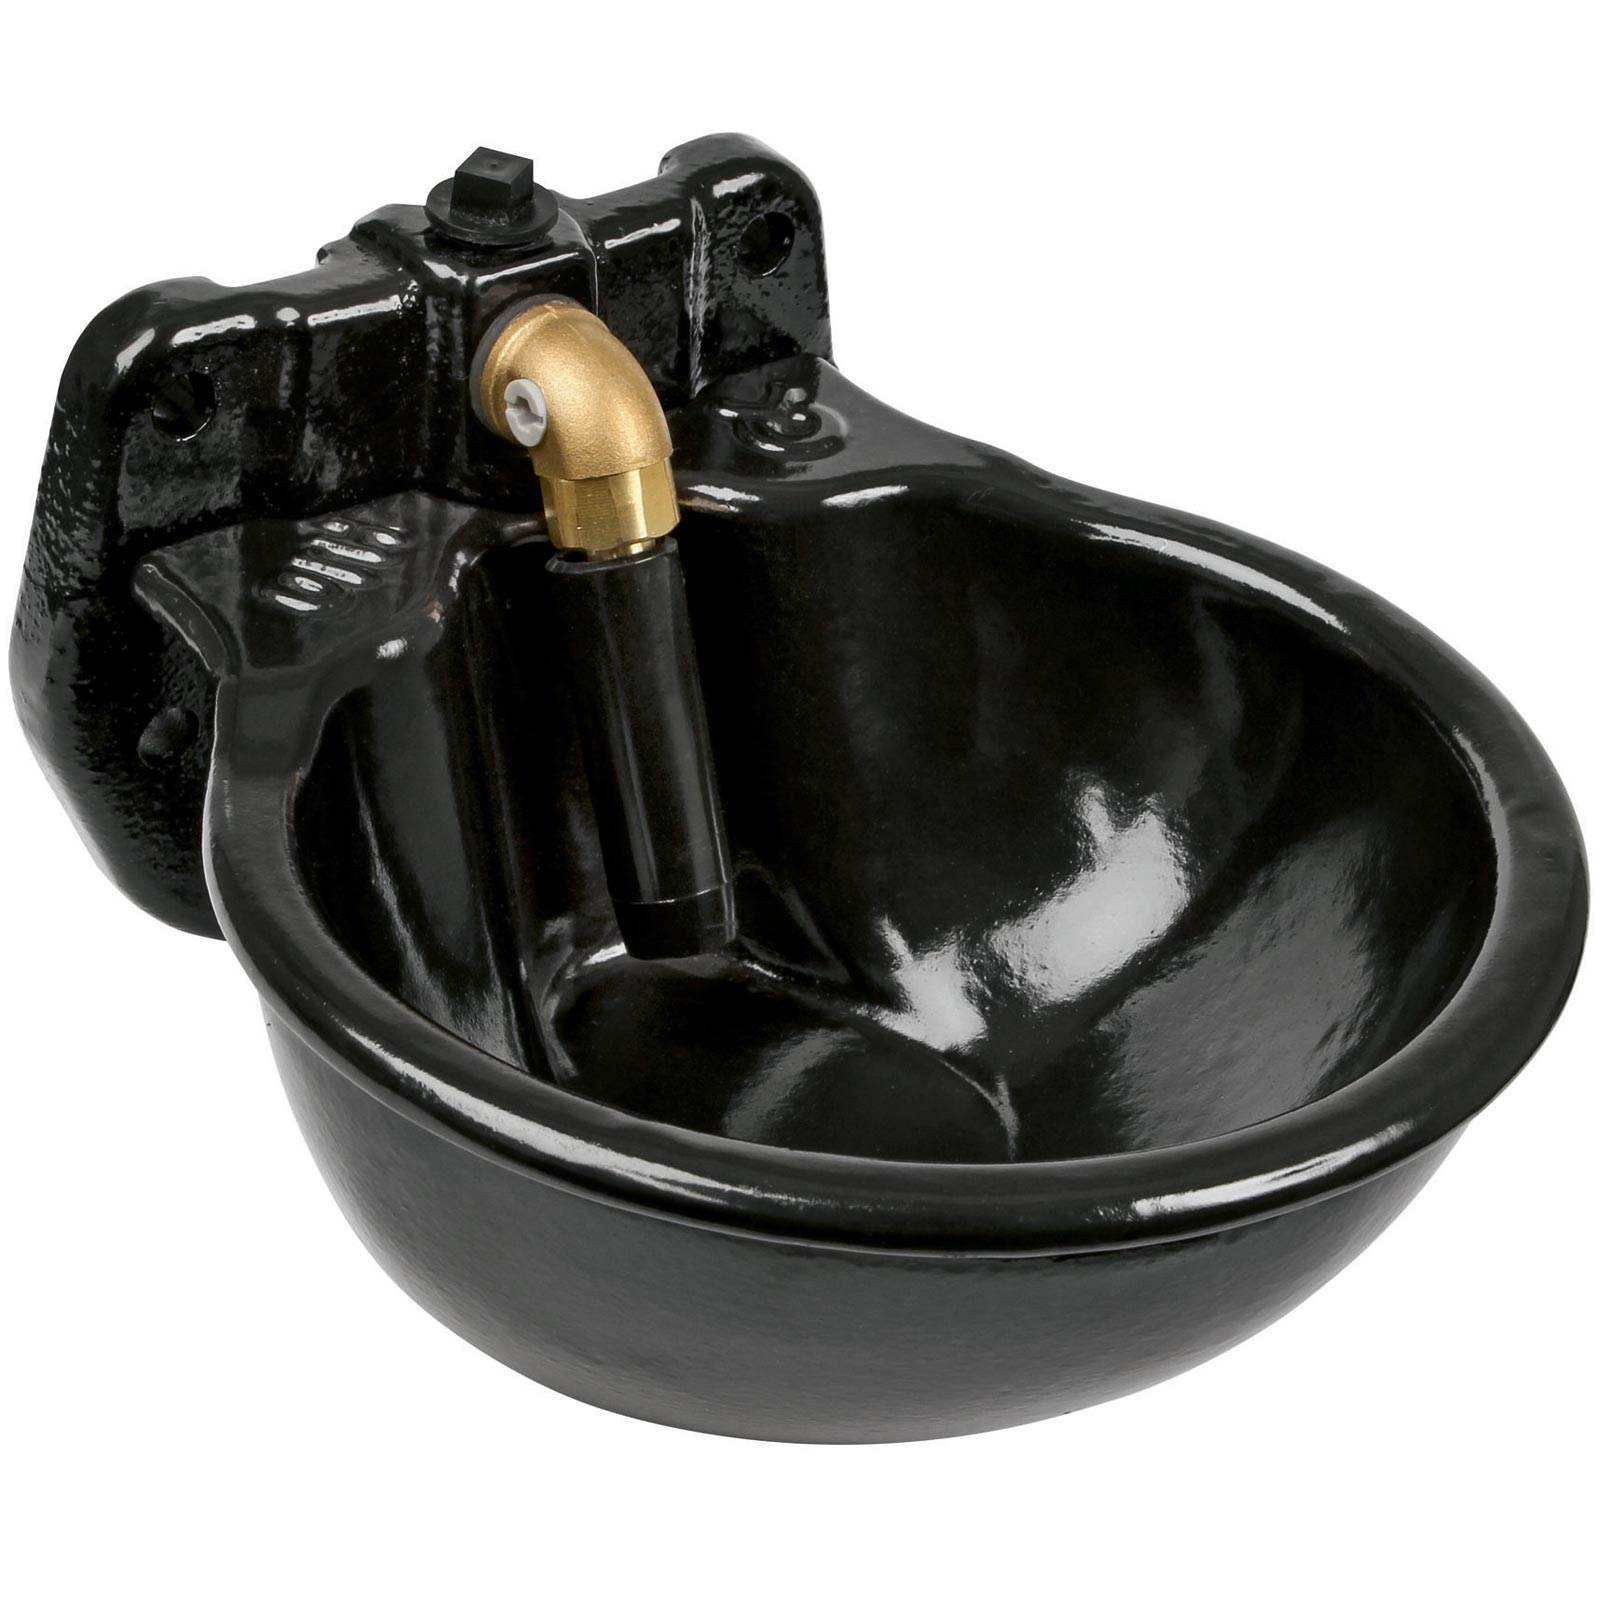 Heatable water bowl H10 with Tube Valve 24 V, 50 W, enamelled